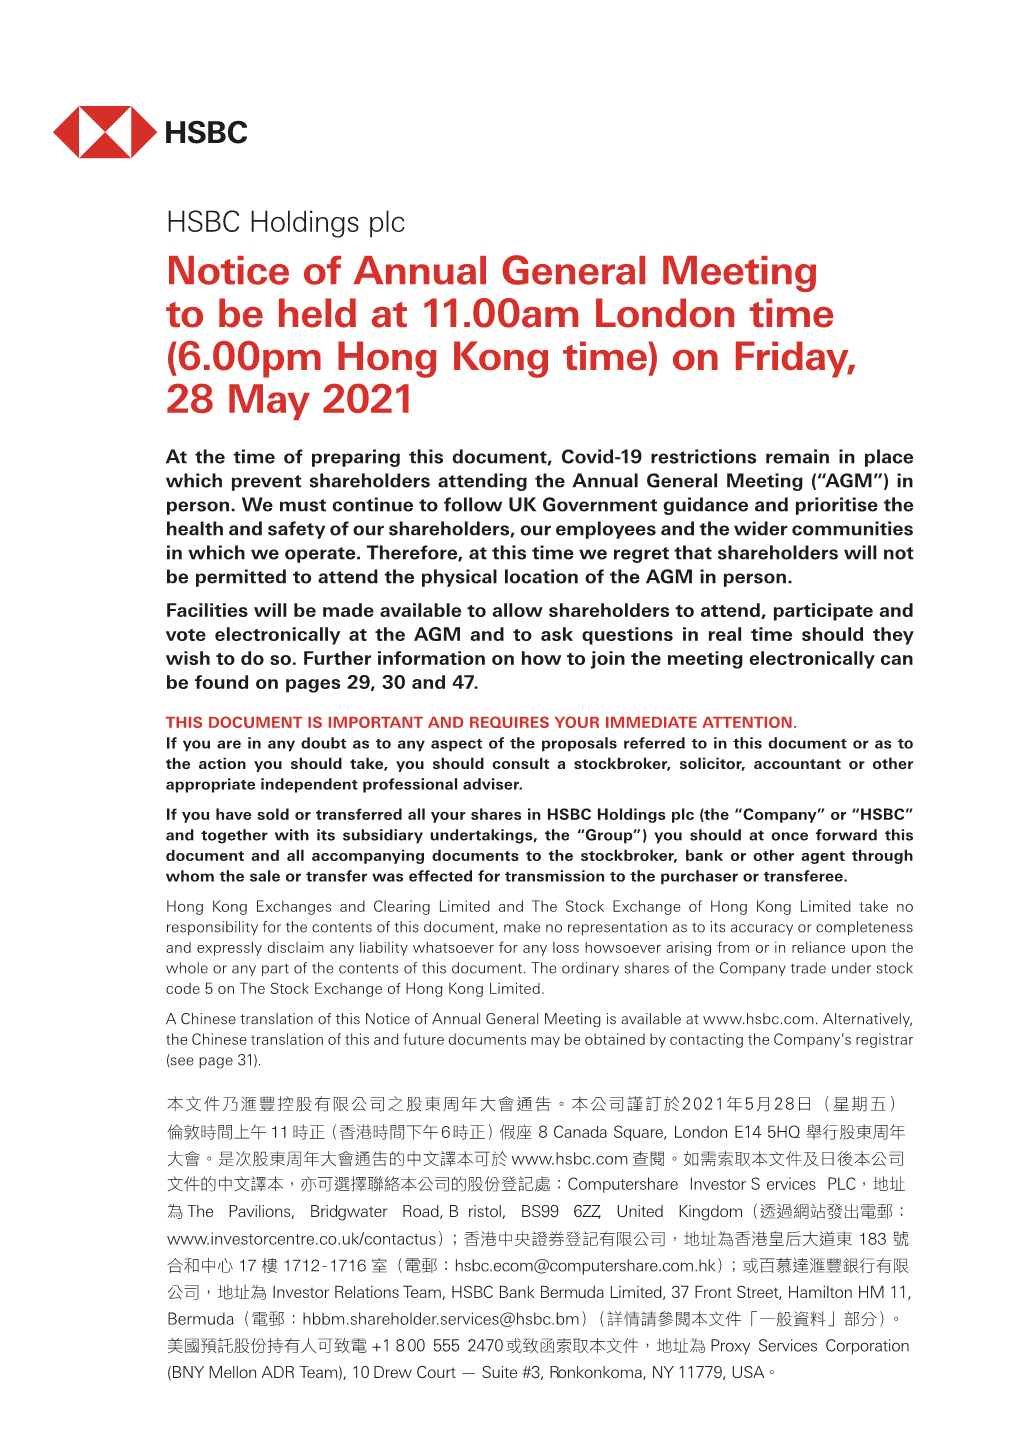 Notice of Annual General Meeting to Be Held at 11.00Am London Time (6.00Pm Hong Kong Time) on Friday, 28 May 2021